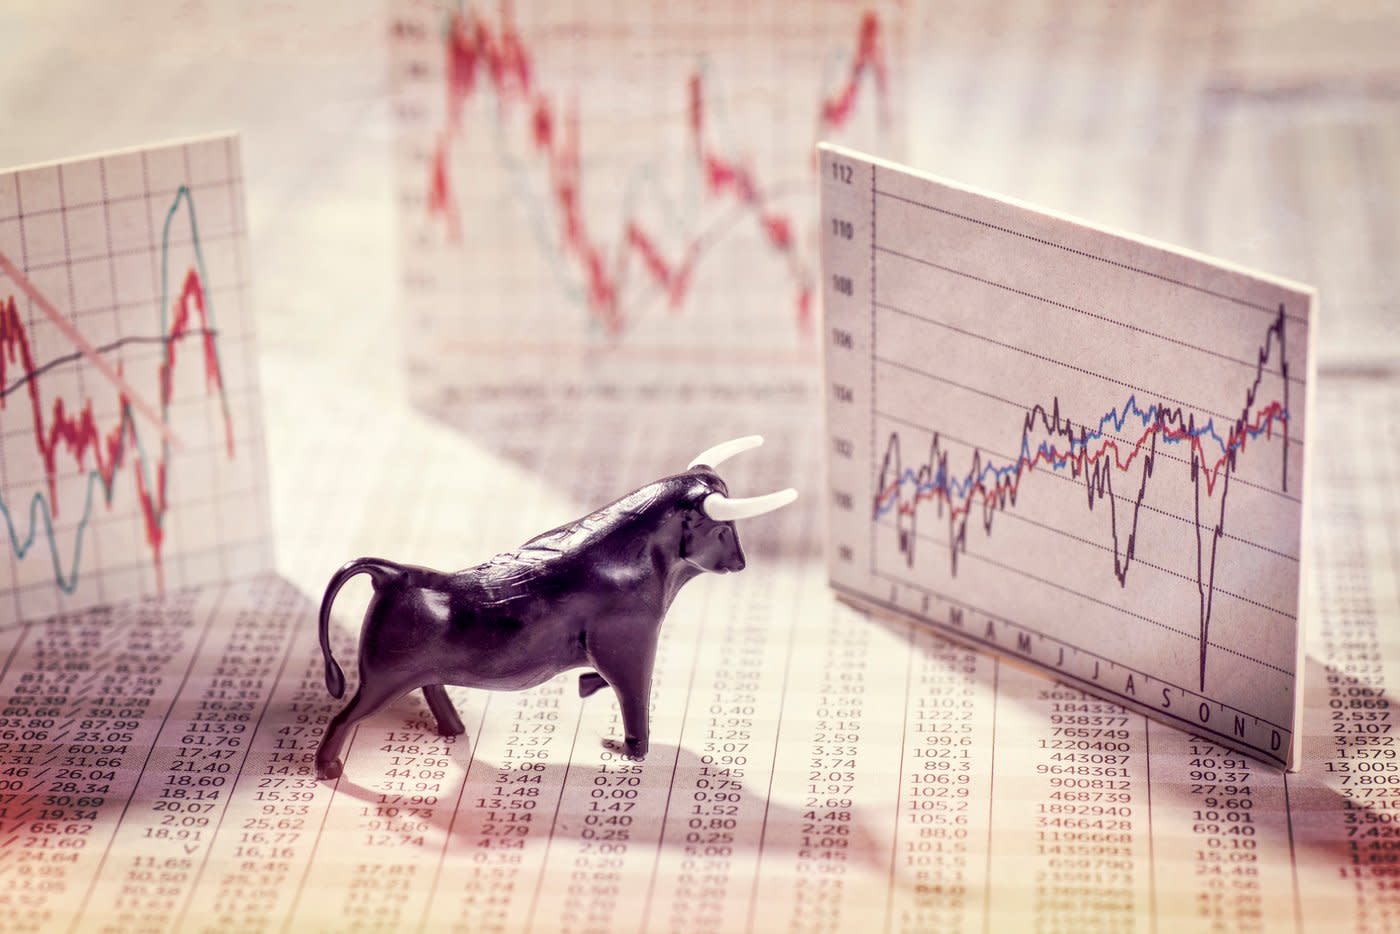 A bull figurine looking at a stock chart.